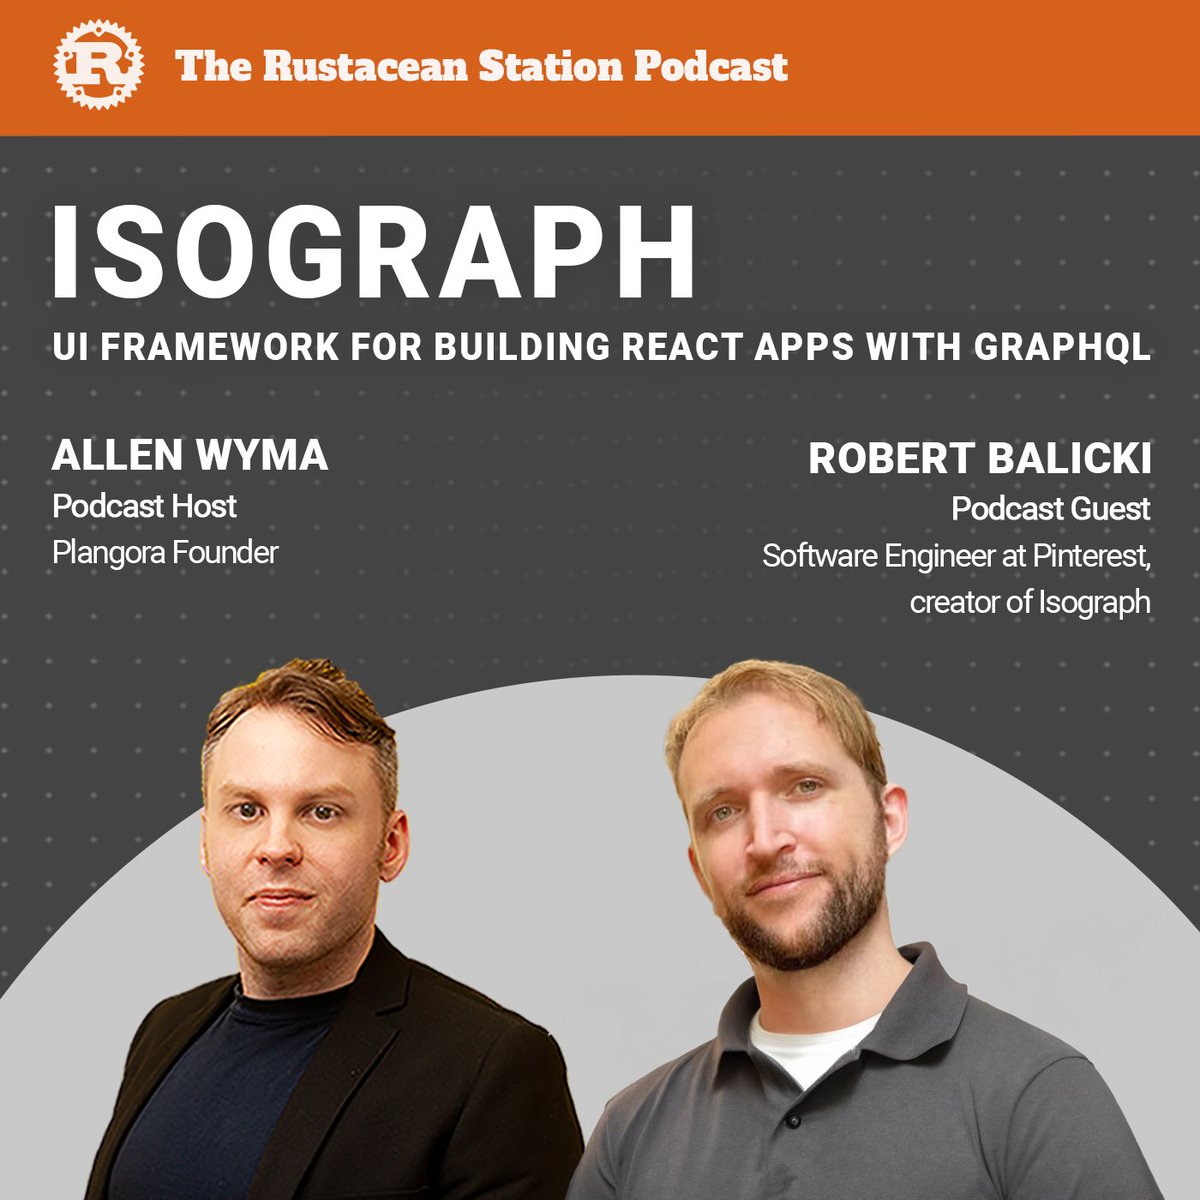 New episode is out on @rustaceanfm  - join @allenwyma as he talks to @StatisticsFTW about Isograph, a UI framework for building React apps with GraphQL, built in Rust by Robert. Tune in for discussions on GraphQL concepts, leveraging Rust, & insights into Isograph's development.